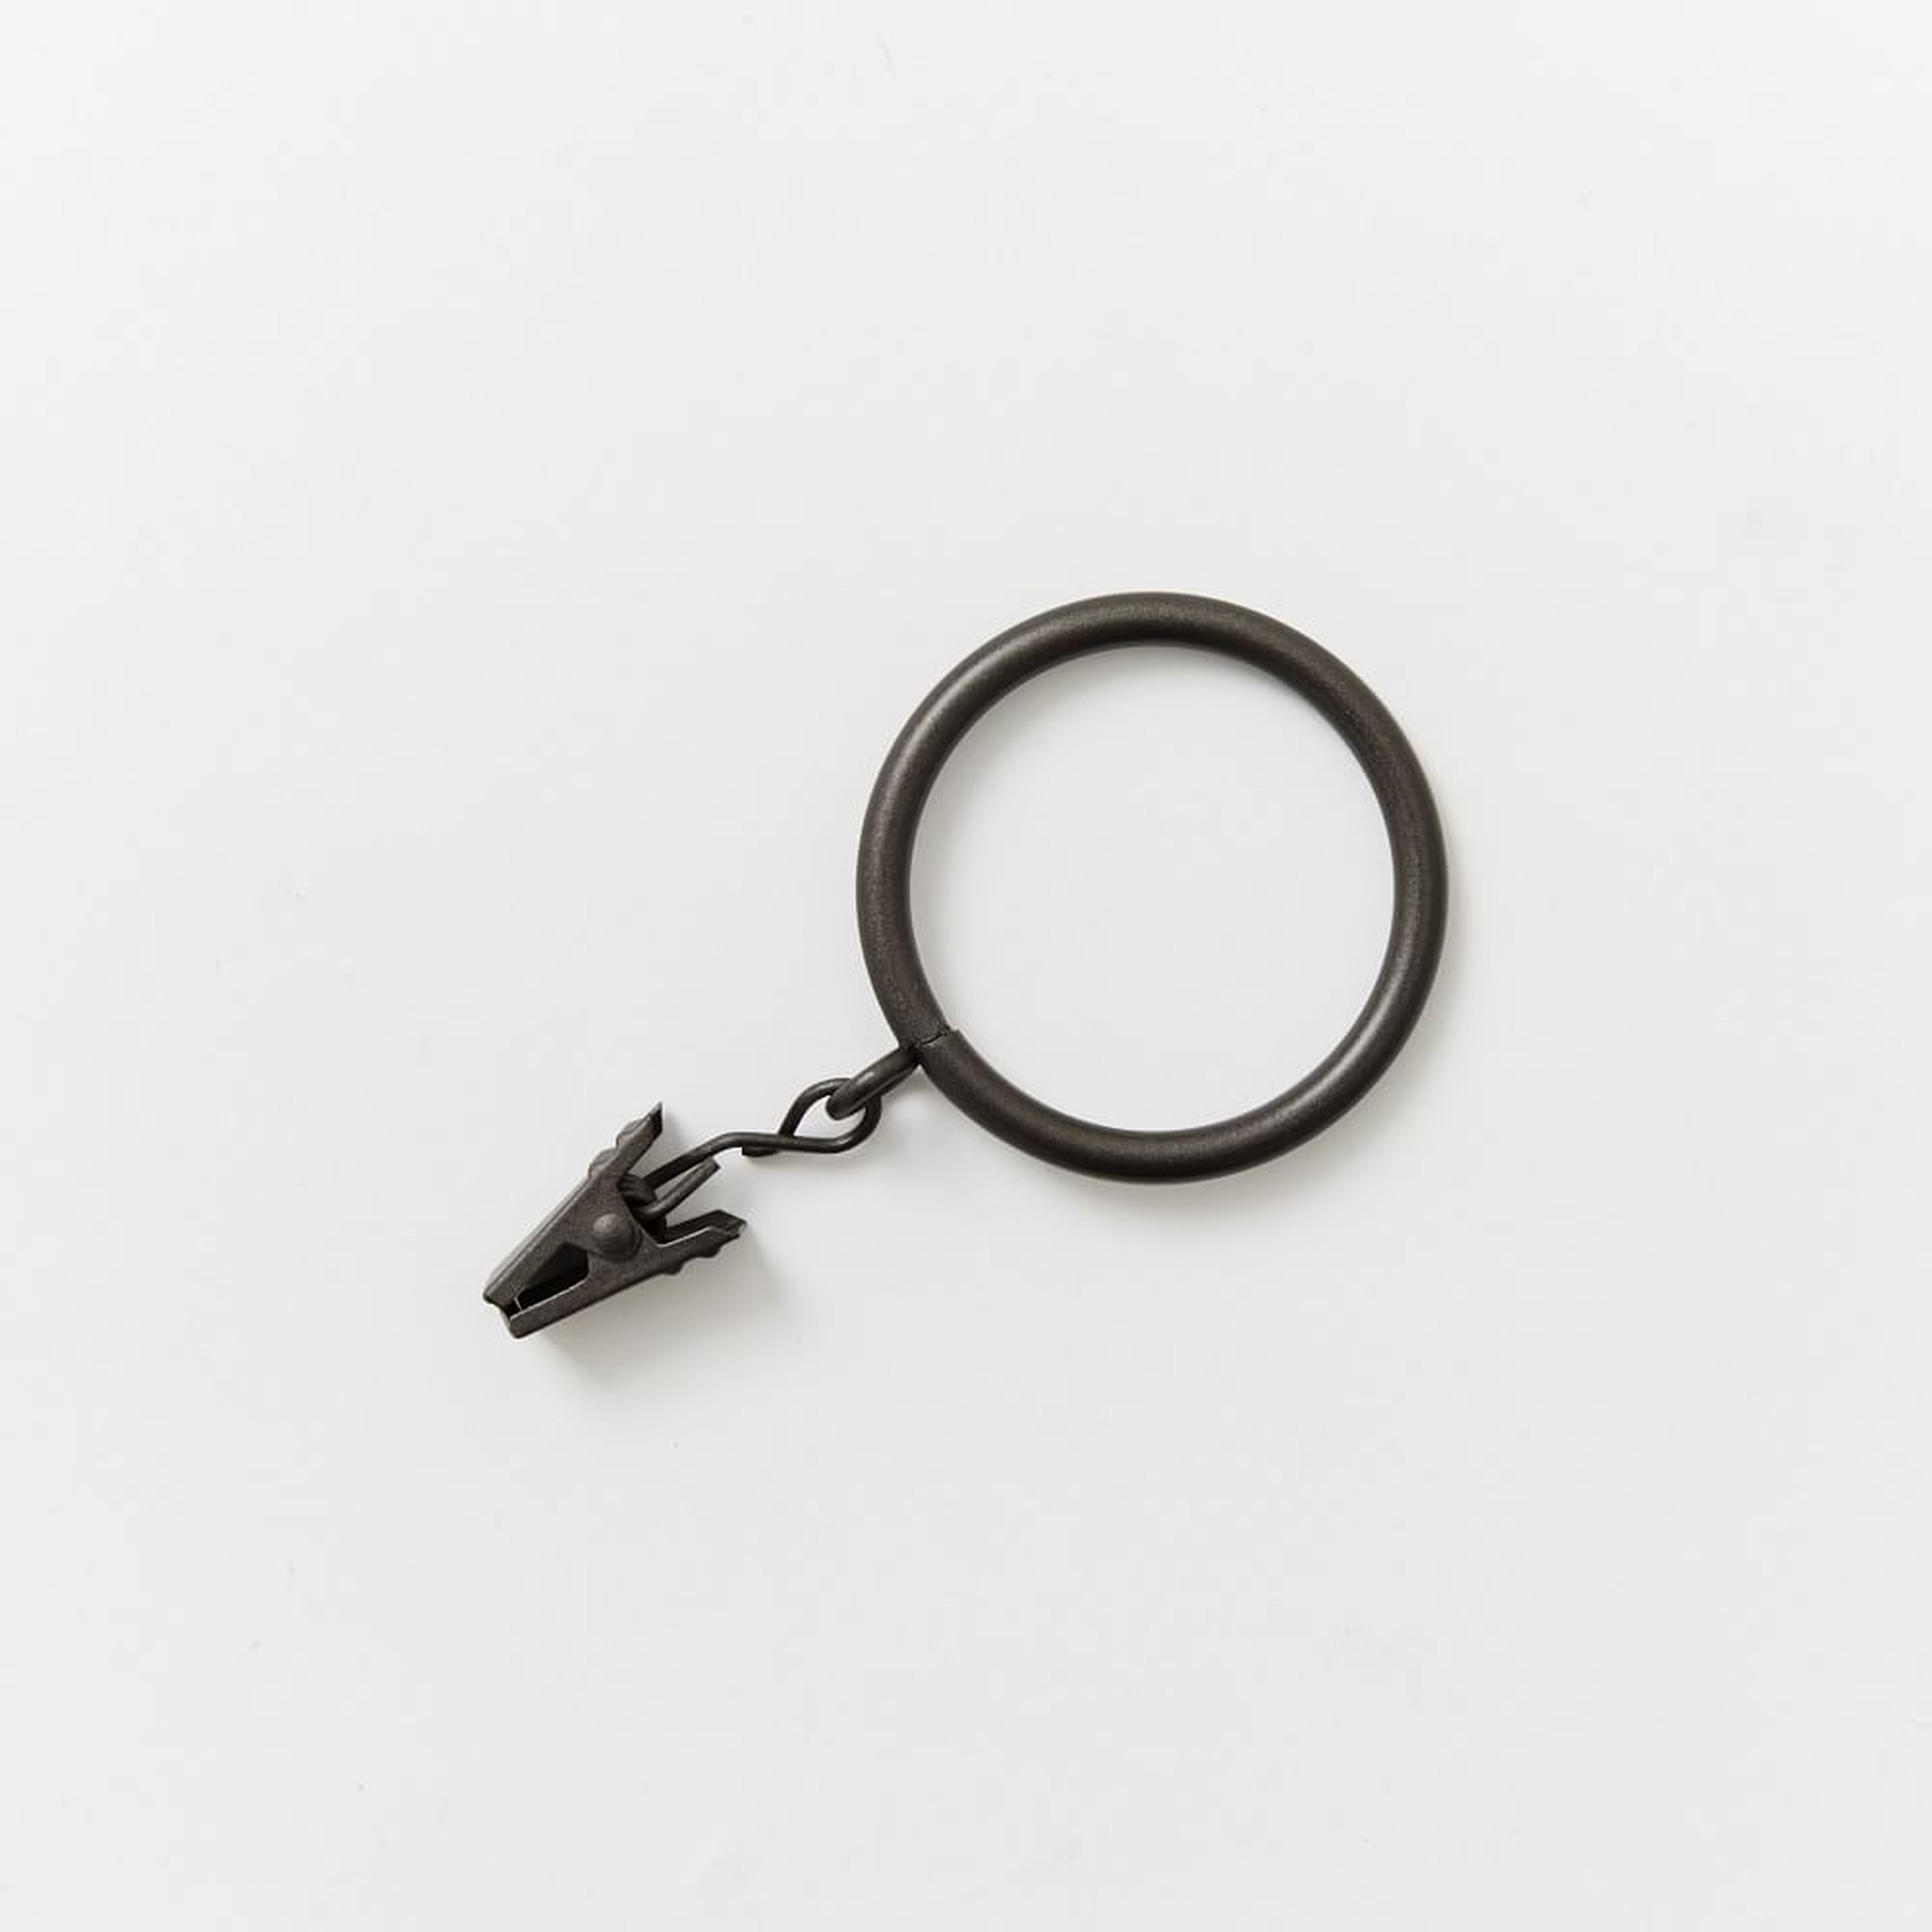 Thin Metal Curtain Rings with Clips, Dark Bronze, Set of 7 - West Elm